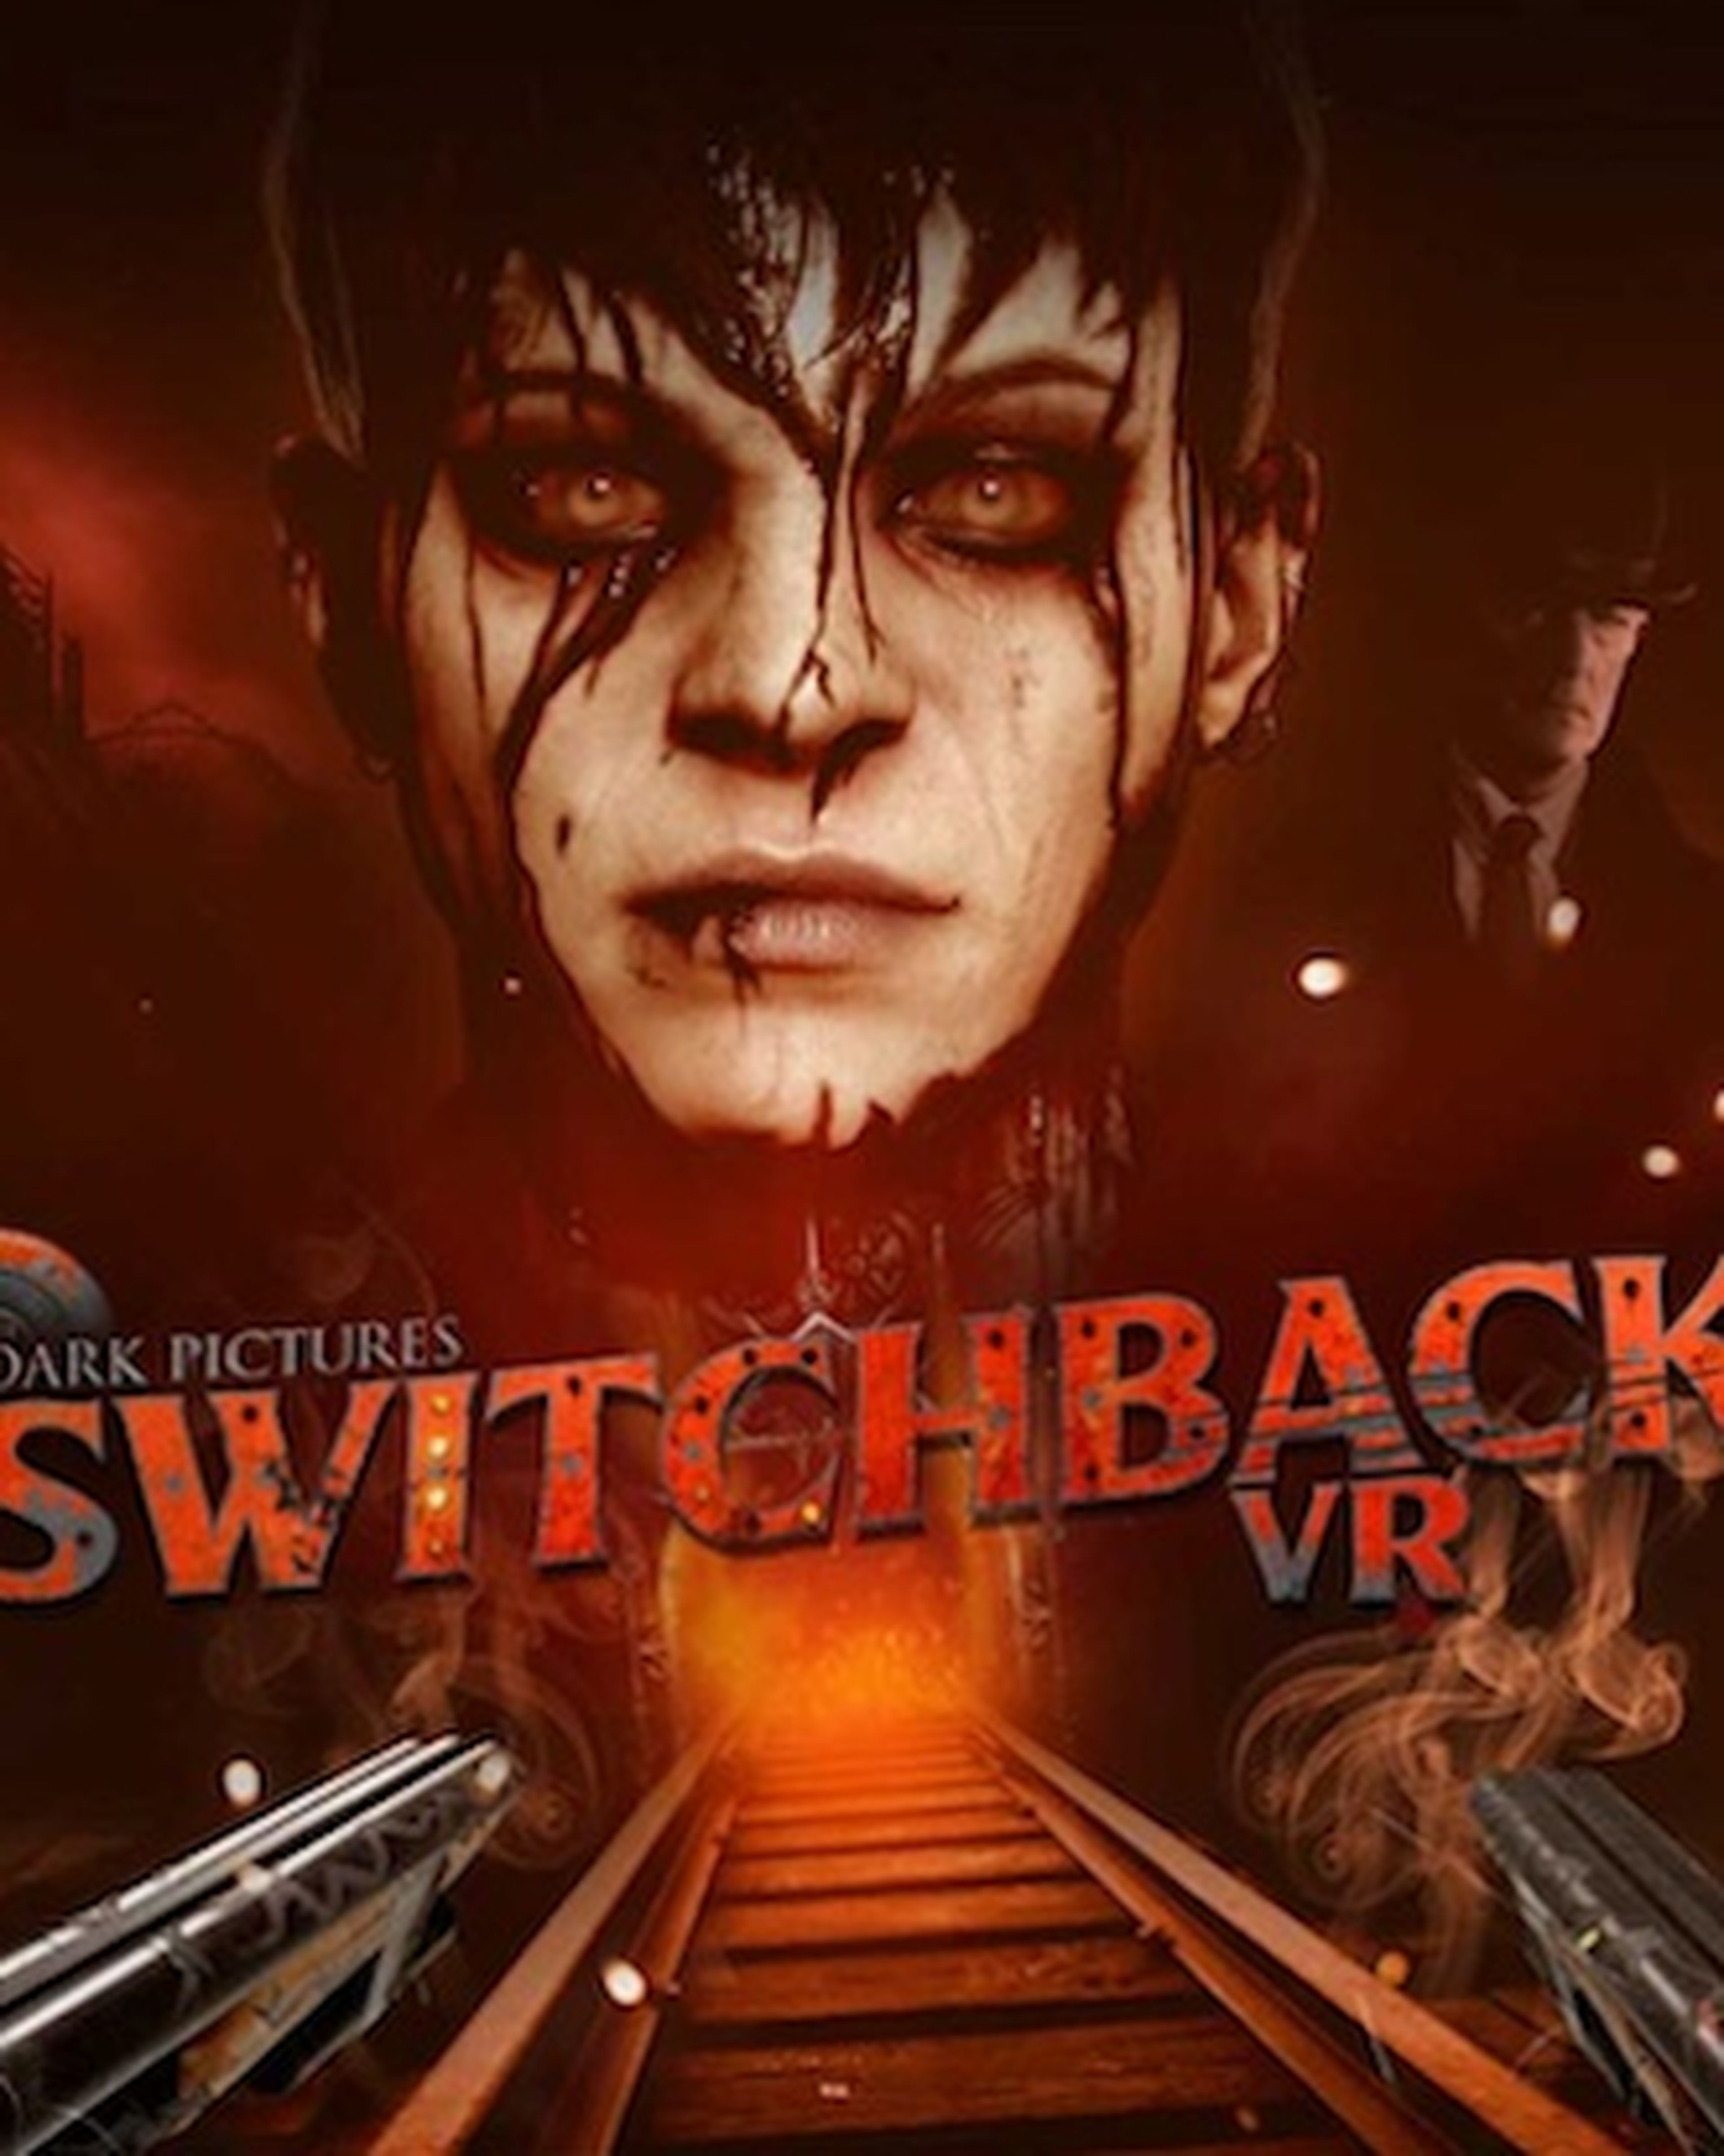 The Dark Pictures Switchback VR FICHA